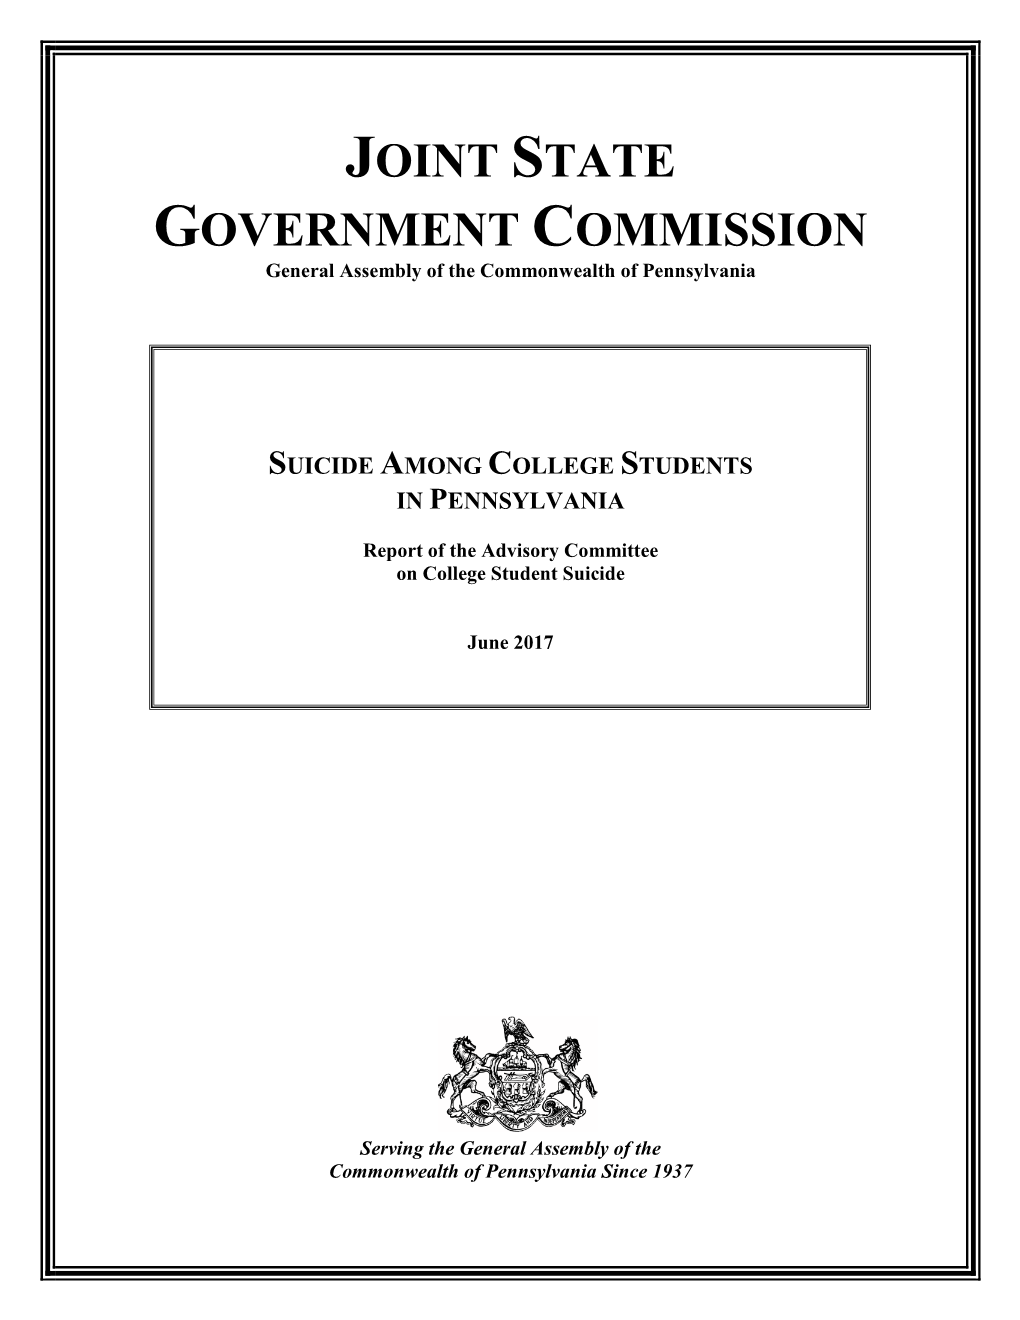 Report of the Advisory Committee on College Student Suicide